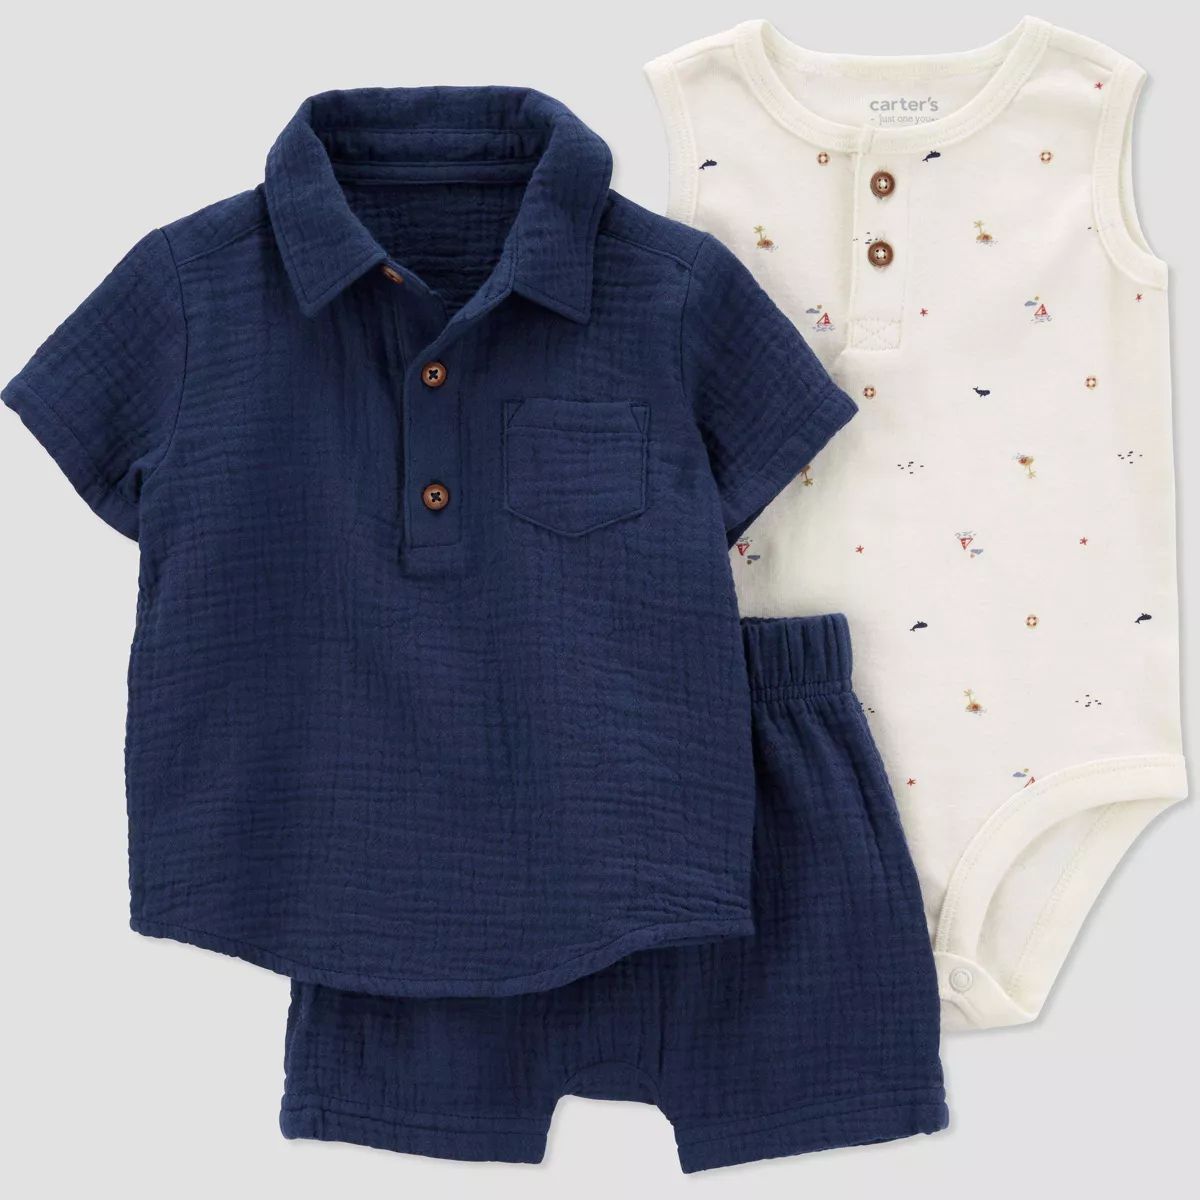 Carter's Just One You® Baby Boys' 3pc Top & Bottom Set - Navy Blue/White | Target